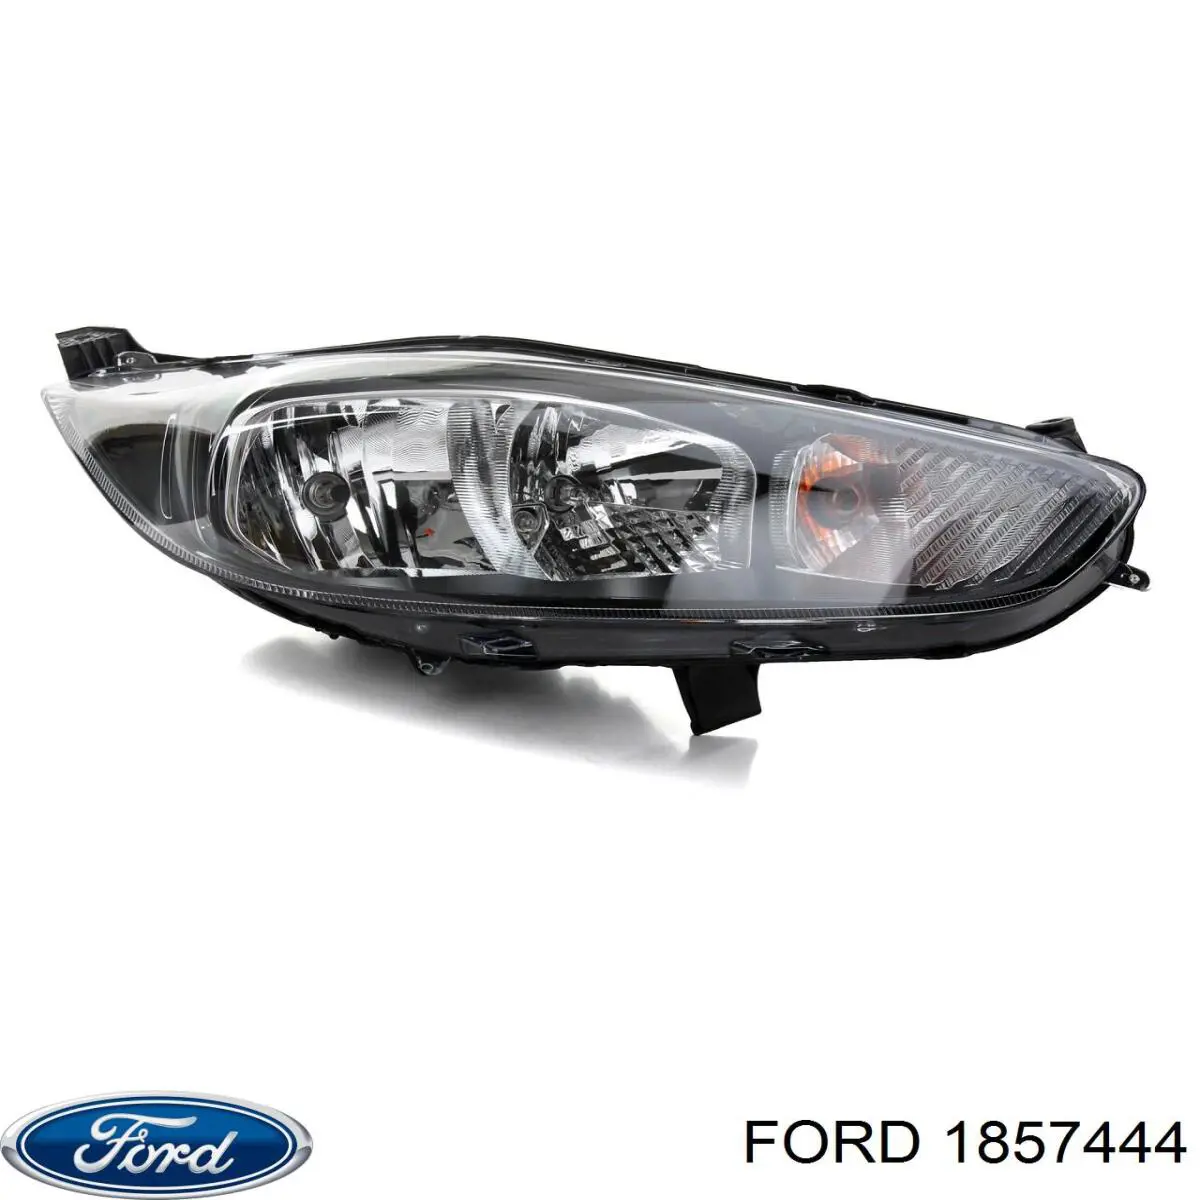 1857444 Ford фара права